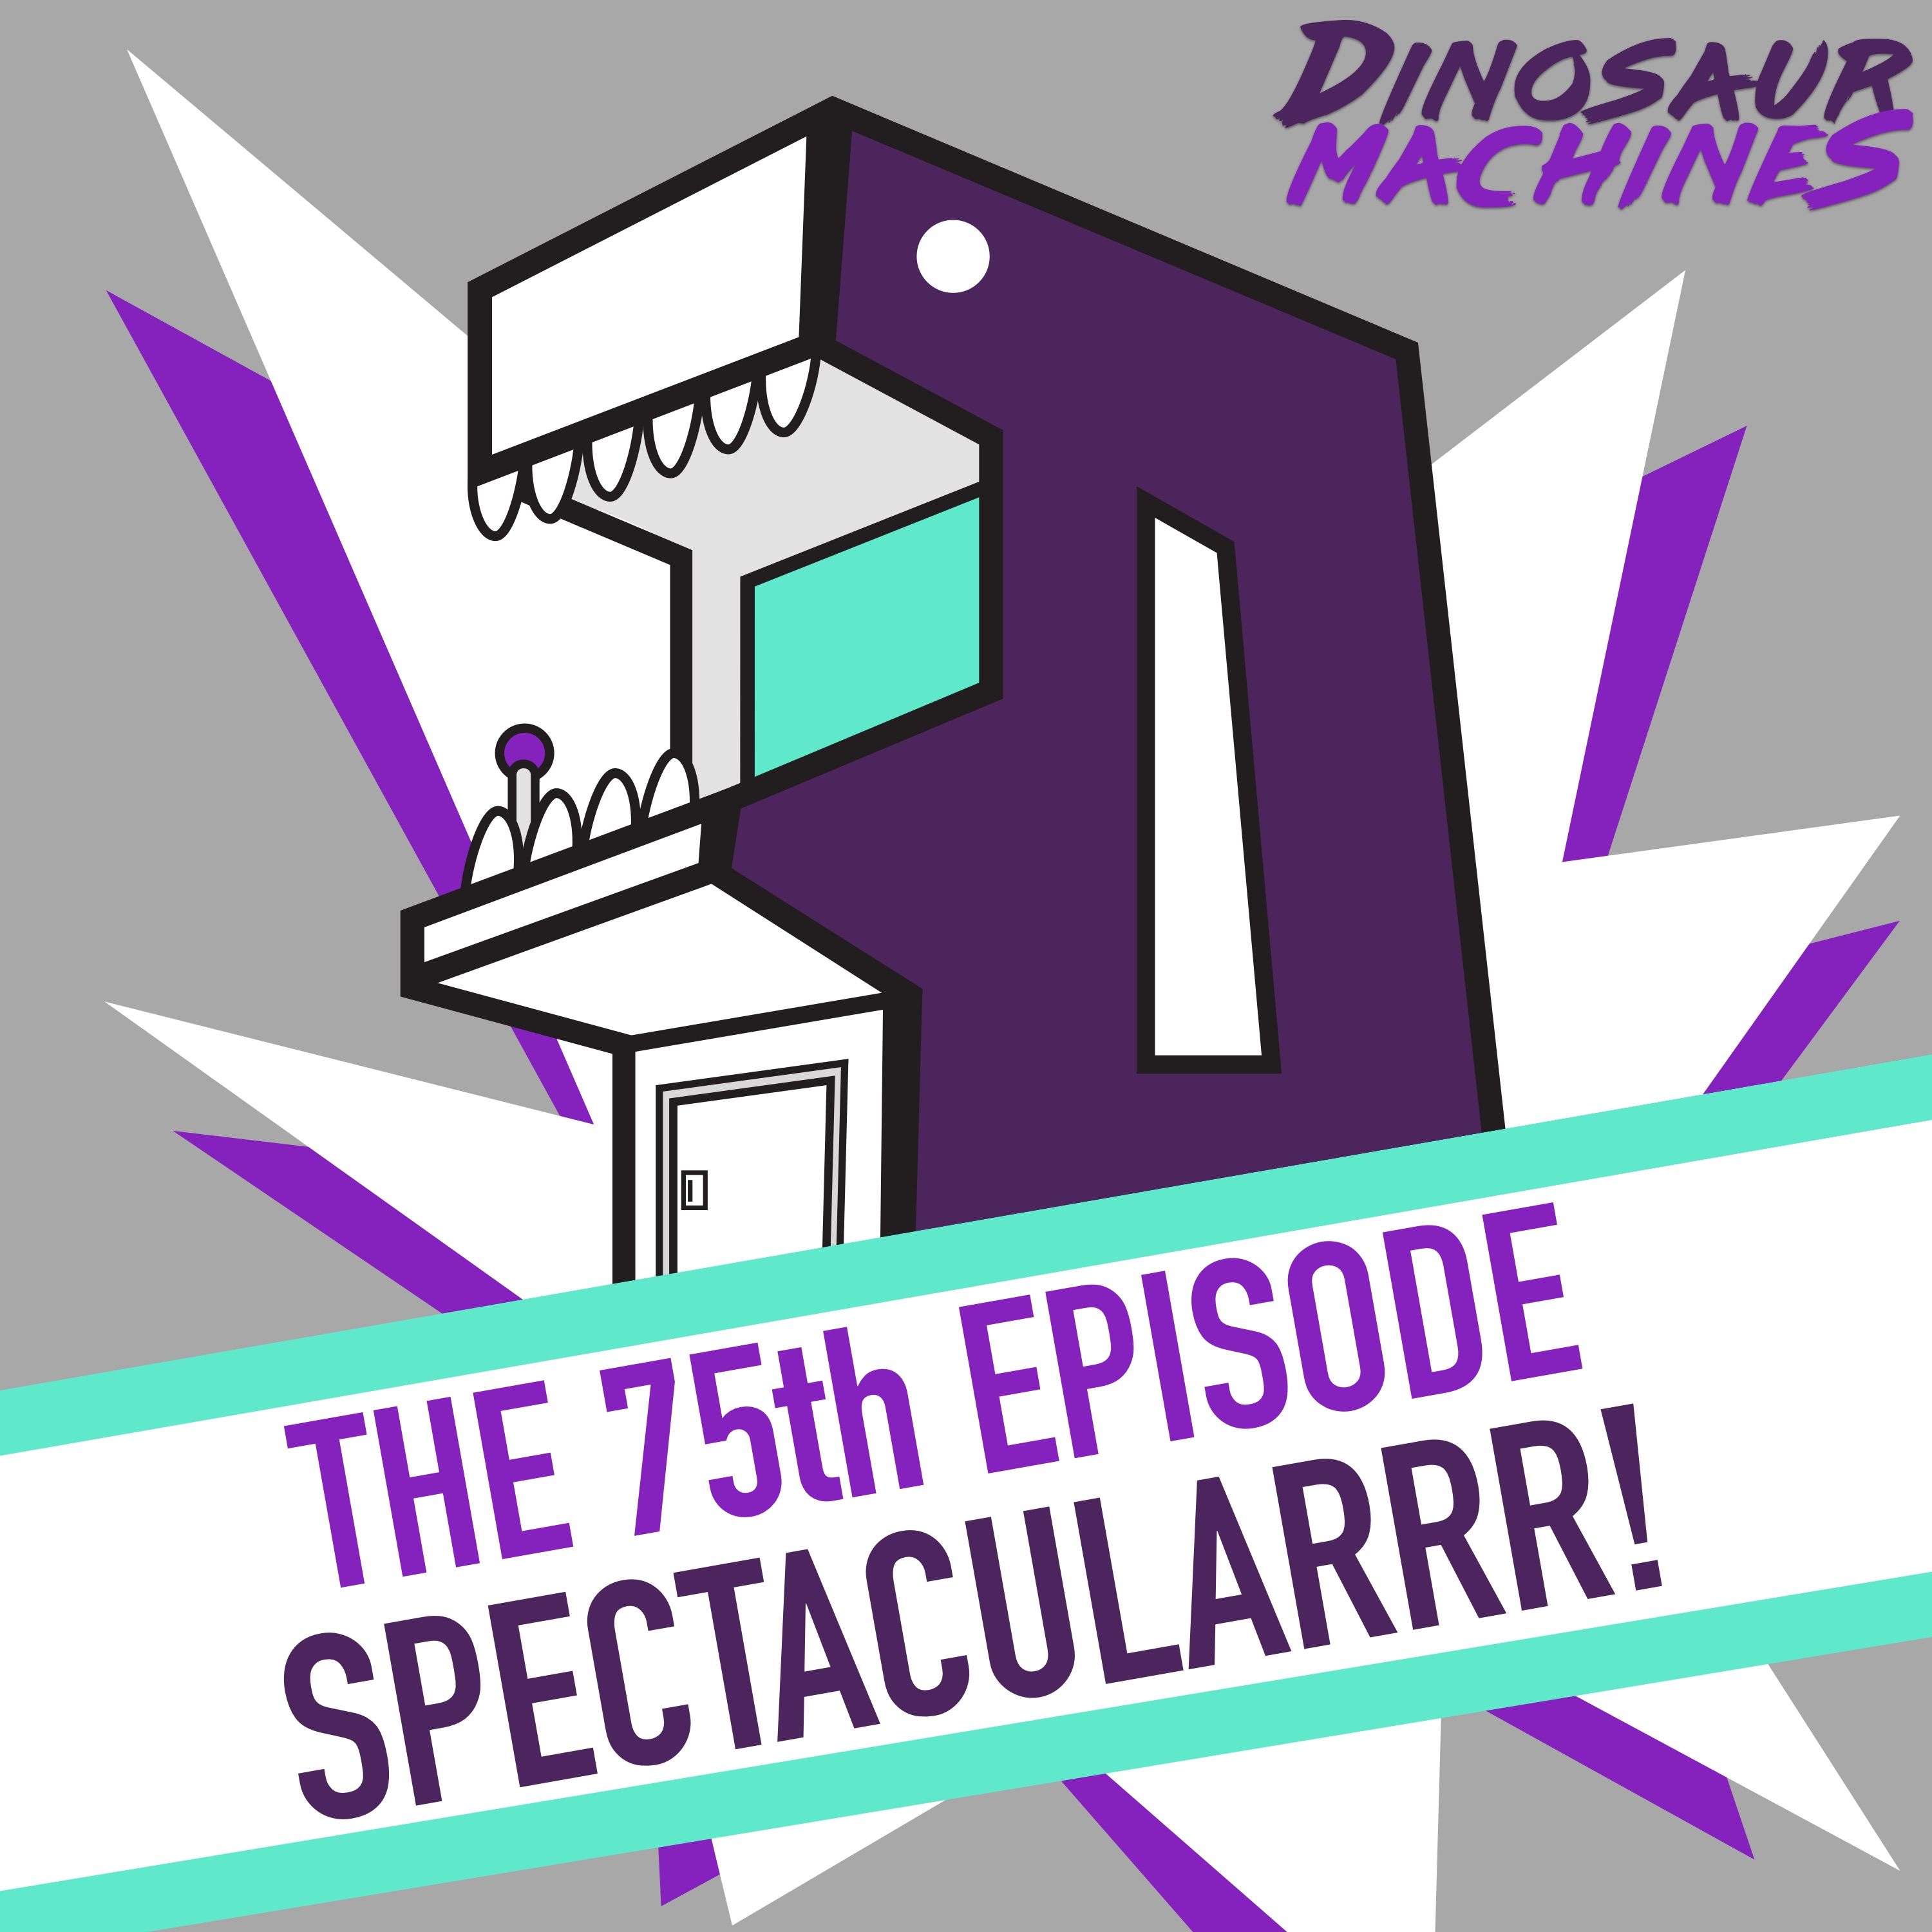 The 75th Episode Spectacularrr!